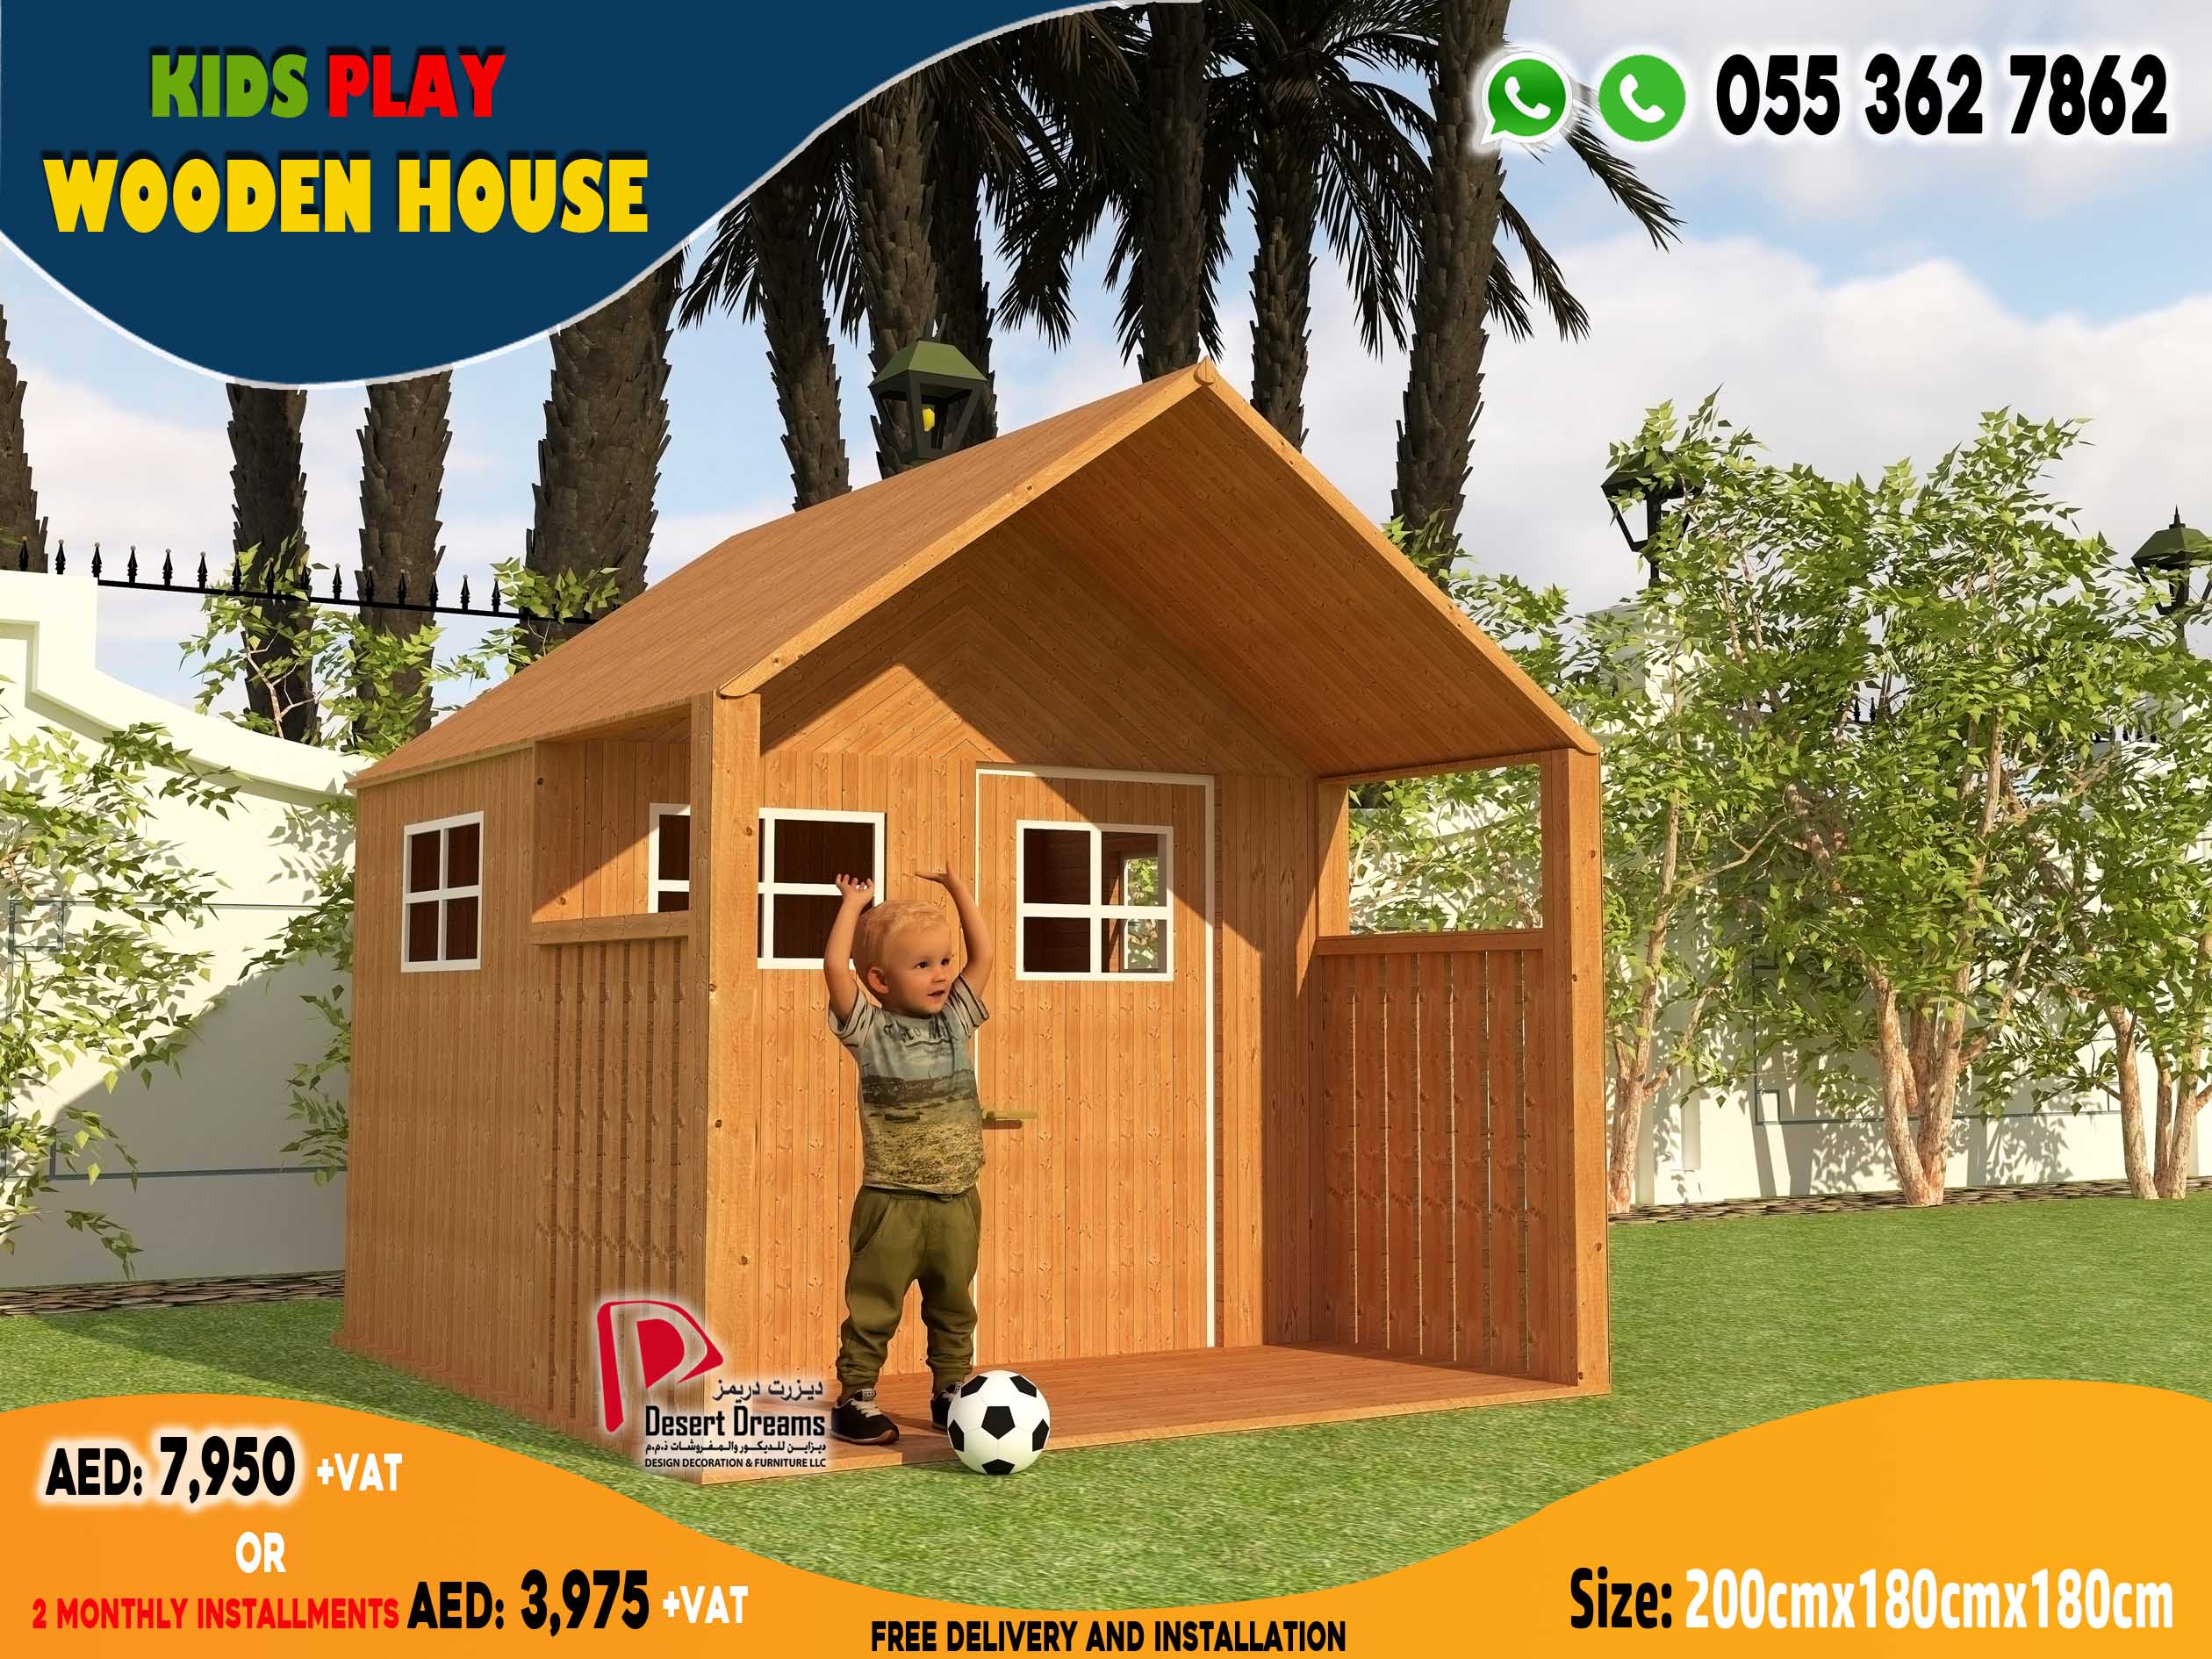 Kids Play Wooden House Suppliers in Uae | Cat House and Dog House